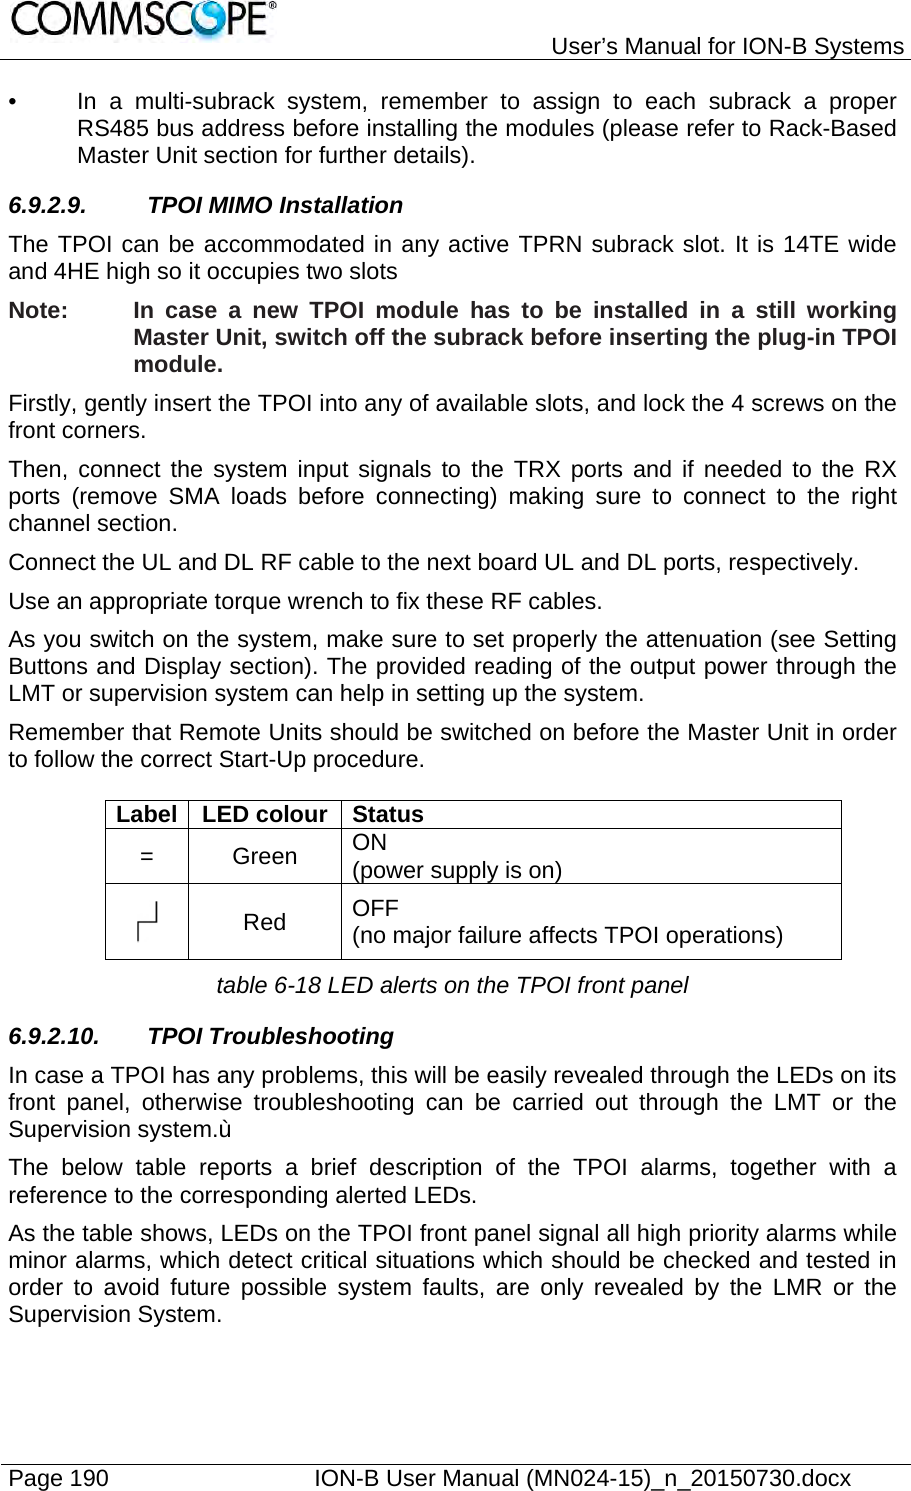   User’s Manual for ION-B Systems Page 190    ION-B User Manual (MN024-15)_n_20150730.docx  •  In a multi-subrack system, remember to assign to each subrack a proper RS485 bus address before installing the modules (please refer to Rack-Based Master Unit section for further details). 6.9.2.9. TPOI MIMO Installation The TPOI can be accommodated in any active TPRN subrack slot. It is 14TE wide and 4HE high so it occupies two slots Note:  In case a new TPOI module has to be installed in a still working Master Unit, switch off the subrack before inserting the plug-in TPOI module.  Firstly, gently insert the TPOI into any of available slots, and lock the 4 screws on the front corners. Then, connect the system input signals to the TRX ports and if needed to the RX ports (remove SMA loads before connecting) making sure to connect to the right channel section. Connect the UL and DL RF cable to the next board UL and DL ports, respectively.  Use an appropriate torque wrench to fix these RF cables. As you switch on the system, make sure to set properly the attenuation (see Setting Buttons and Display section). The provided reading of the output power through the LMT or supervision system can help in setting up the system. Remember that Remote Units should be switched on before the Master Unit in order to follow the correct Start-Up procedure.  Label LED colour Status = Green ON (power supply is on)  Red  OFF (no major failure affects TPOI operations) table 6-18 LED alerts on the TPOI front panel 6.9.2.10. TPOI Troubleshooting In case a TPOI has any problems, this will be easily revealed through the LEDs on its front panel, otherwise troubleshooting can be carried out through the LMT or the Supervision system.ù The below table reports a brief description of the TPOI alarms, together with a reference to the corresponding alerted LEDs. As the table shows, LEDs on the TPOI front panel signal all high priority alarms while minor alarms, which detect critical situations which should be checked and tested in order to avoid future possible system faults, are only revealed by the LMR or the Supervision System.   